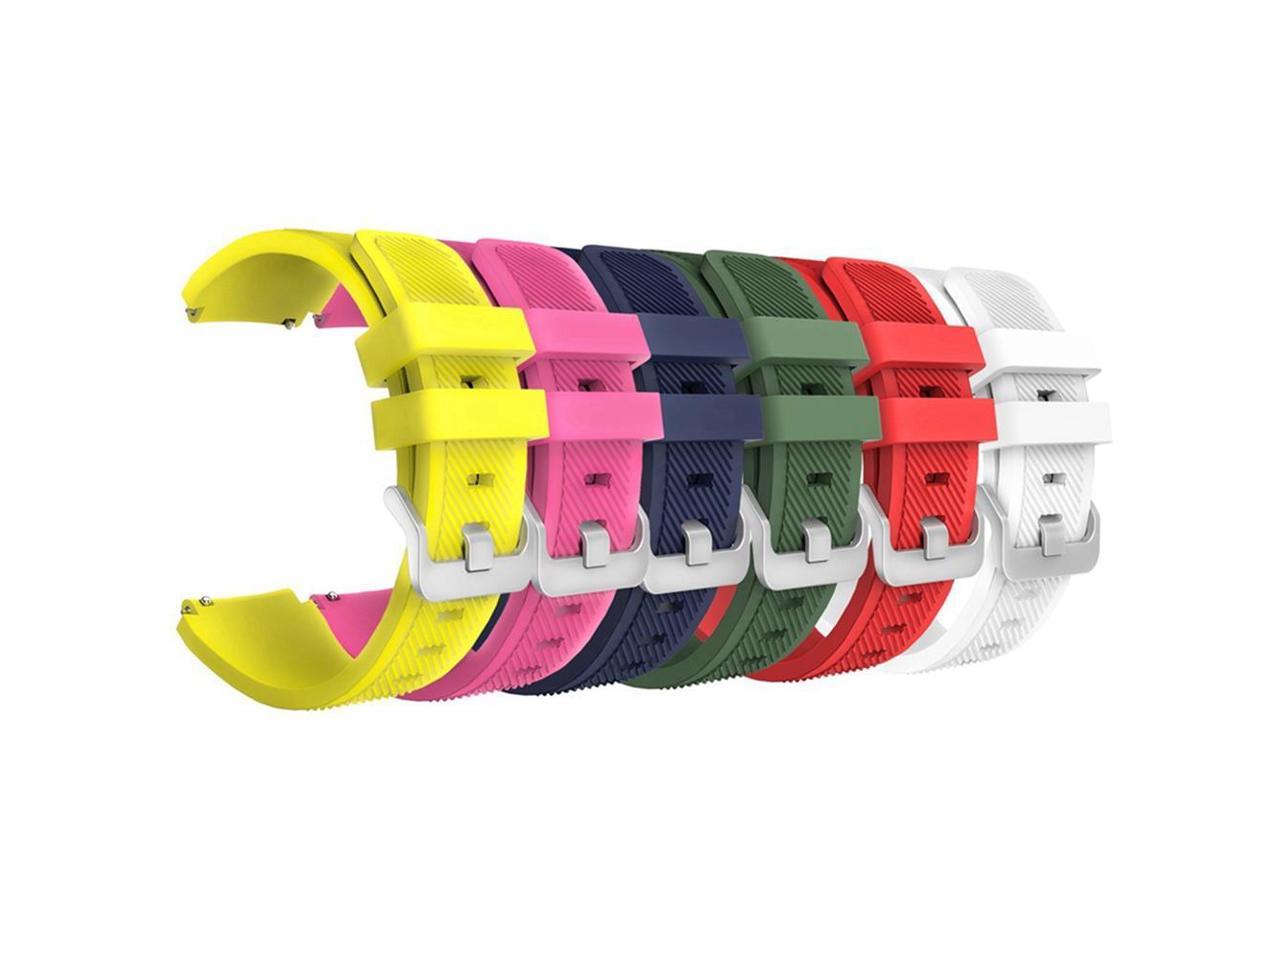 Miimall 6PCS Replacement Soft Silicone Watchbands for Samsung Gear S3/Soft Silicone Straps for Gear S3 Frontier/S3 Classic, Durable and Sturdy - Multicolor (6 PCS)